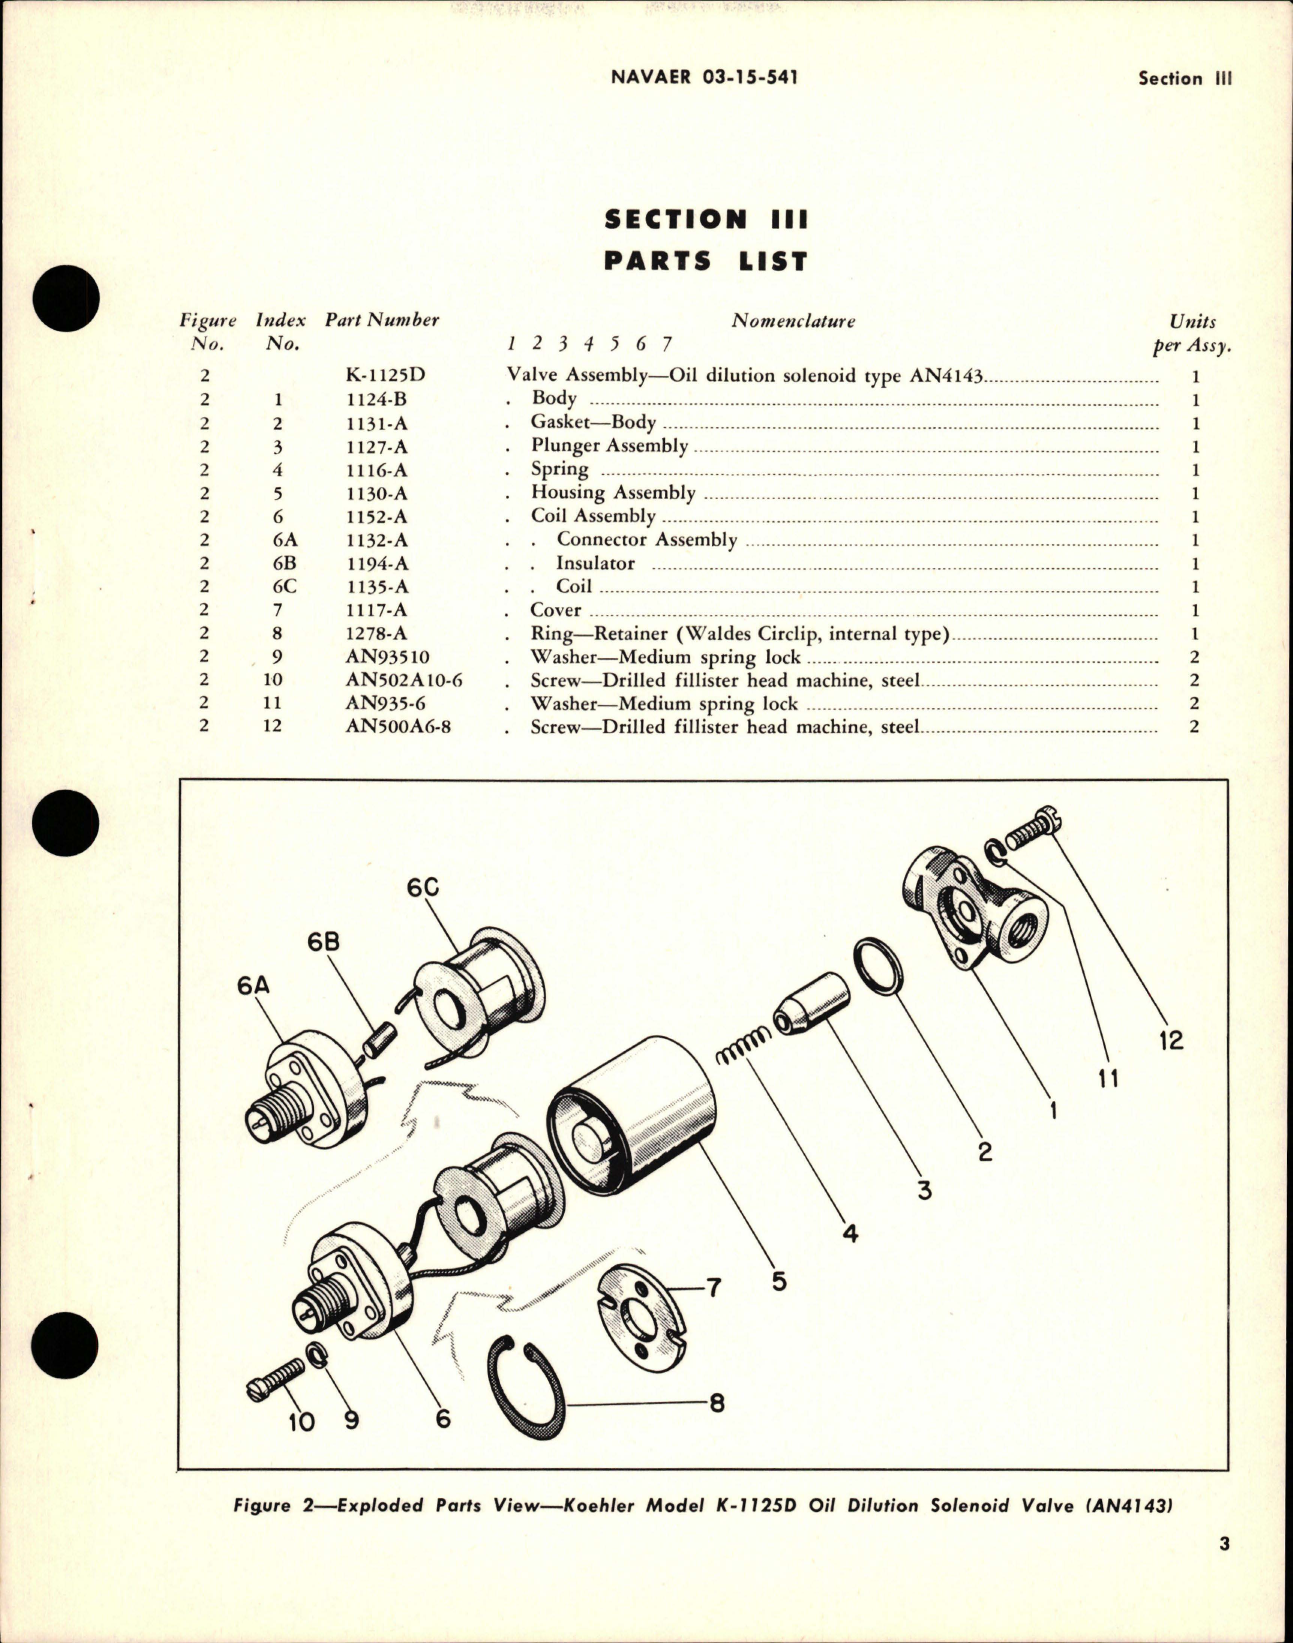 Sample page 5 from AirCorps Library document: Operation, Service, Overhaul Instructions w Parts Catalog for Oil Dilution Solenoid Valve - Model K-1125D